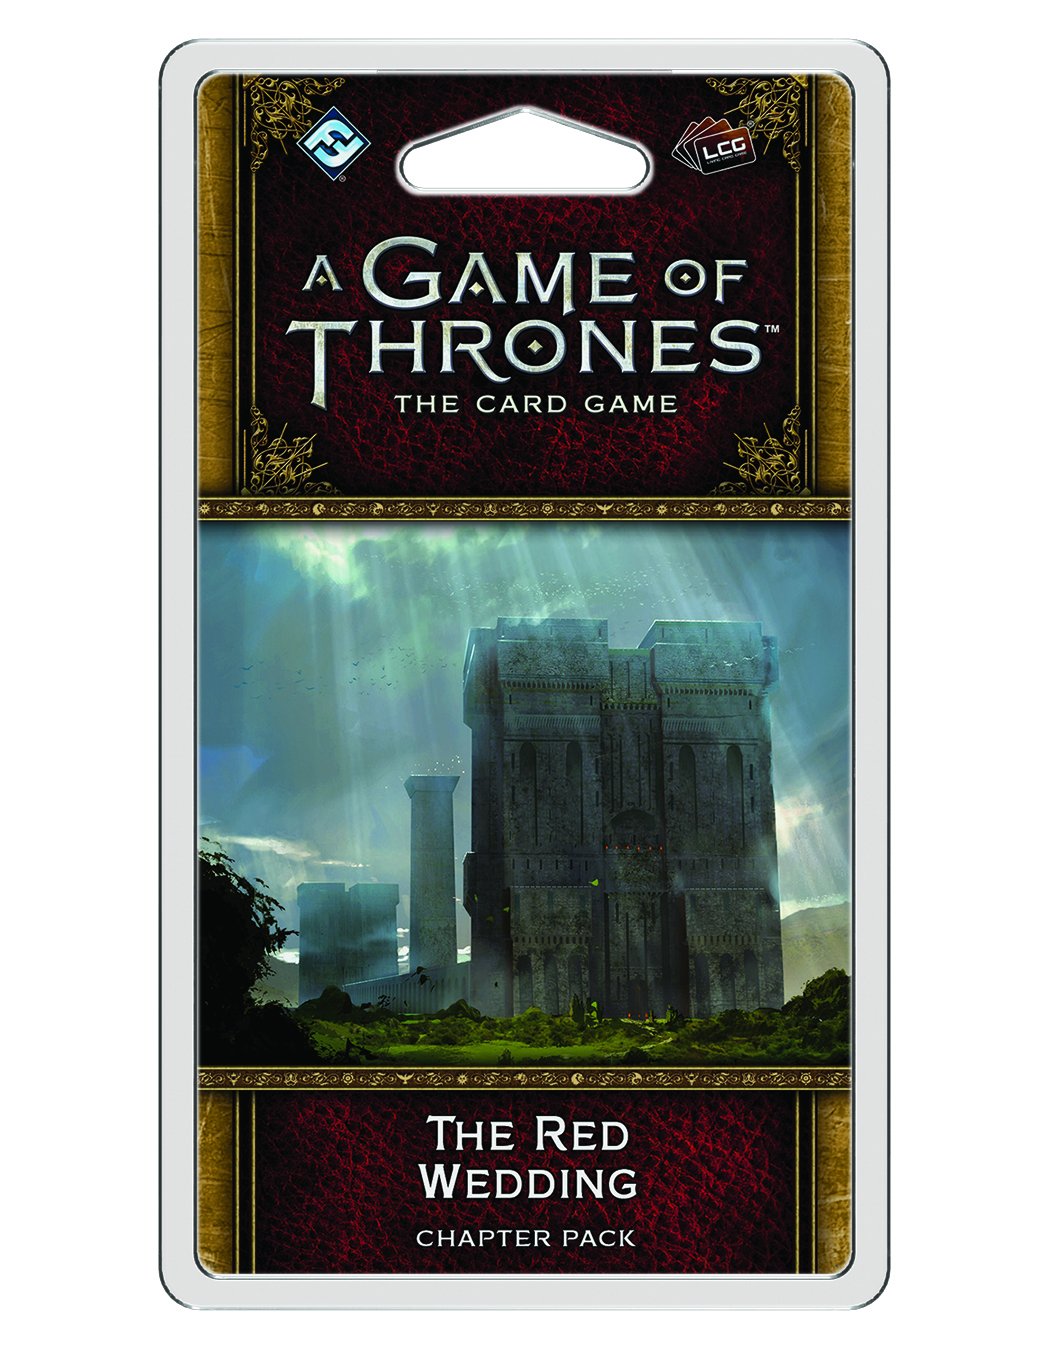 A Game of Thrones The Card Game 2nd Edition The Red Wedding CHAPTER PACK | Strategy Game for Adults and Teens | Ages 14 and up | 2-4 Players | Average Playtime 1-2 Hours | Made by Fantasy Flight Games